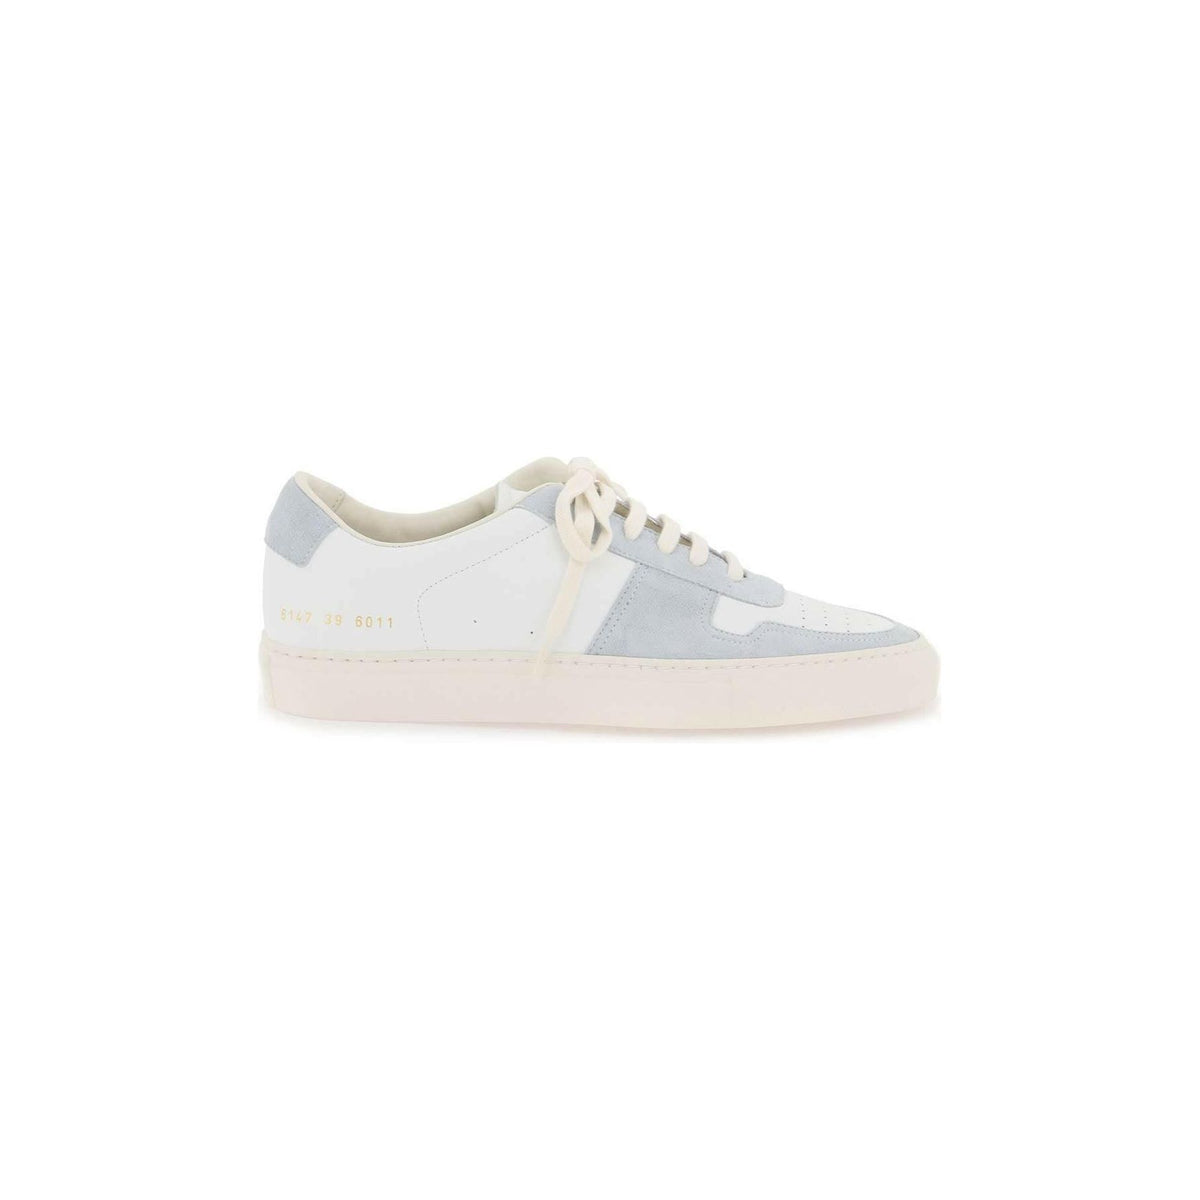 Baby Blue BBall Nappa Leather Sneakers COMMON PROJECTS JOHN JULIA.